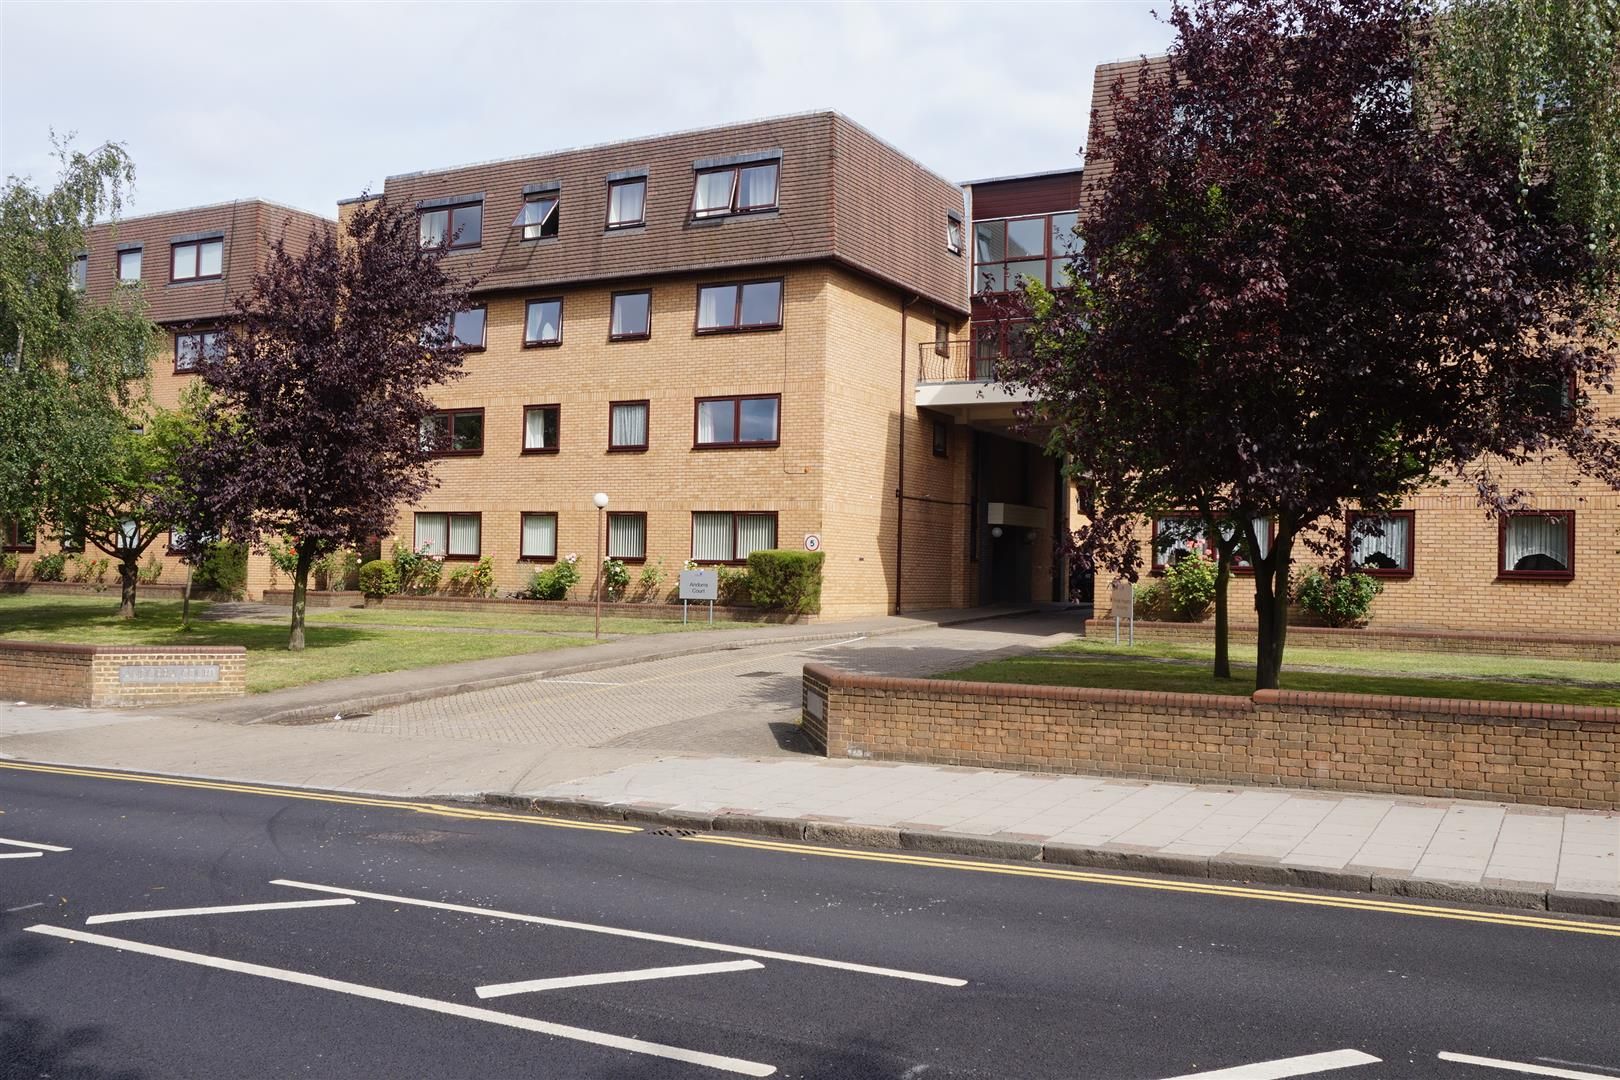 Andorra Court, Widmore Road, Bromley, Kent, BR1 3AE